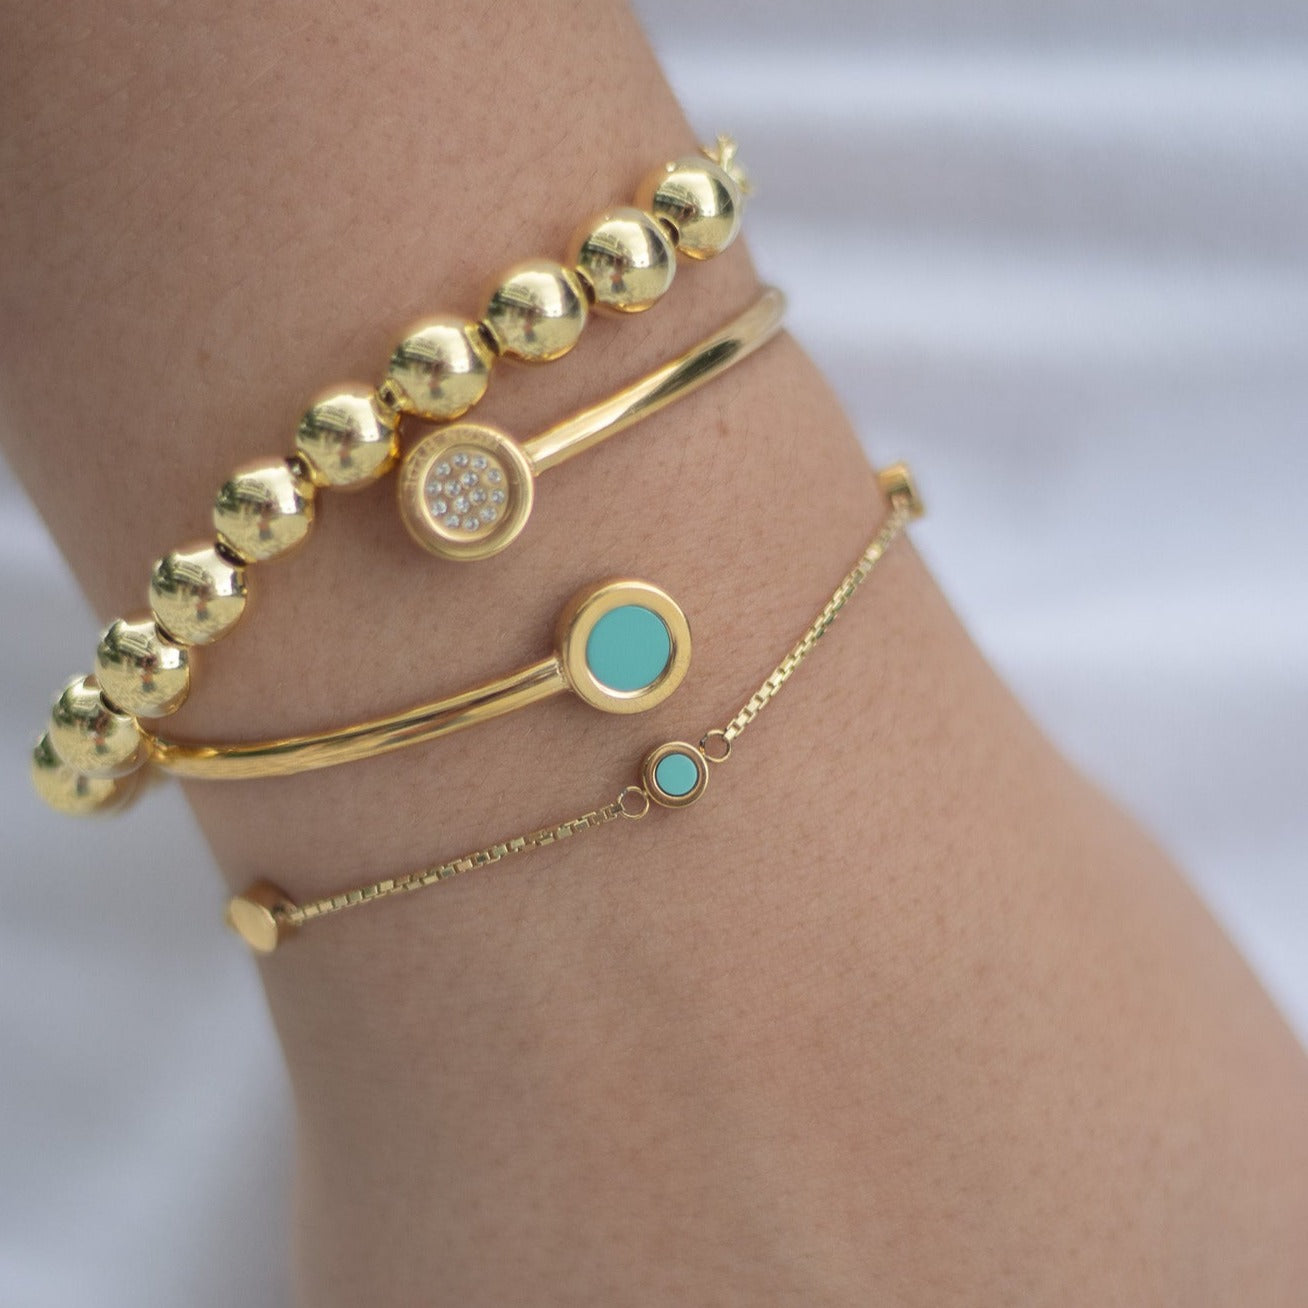 NEW WAVE STERLING SILVER 18K GOLD PLATED TURQUOISE 3 CHIP BRACELET